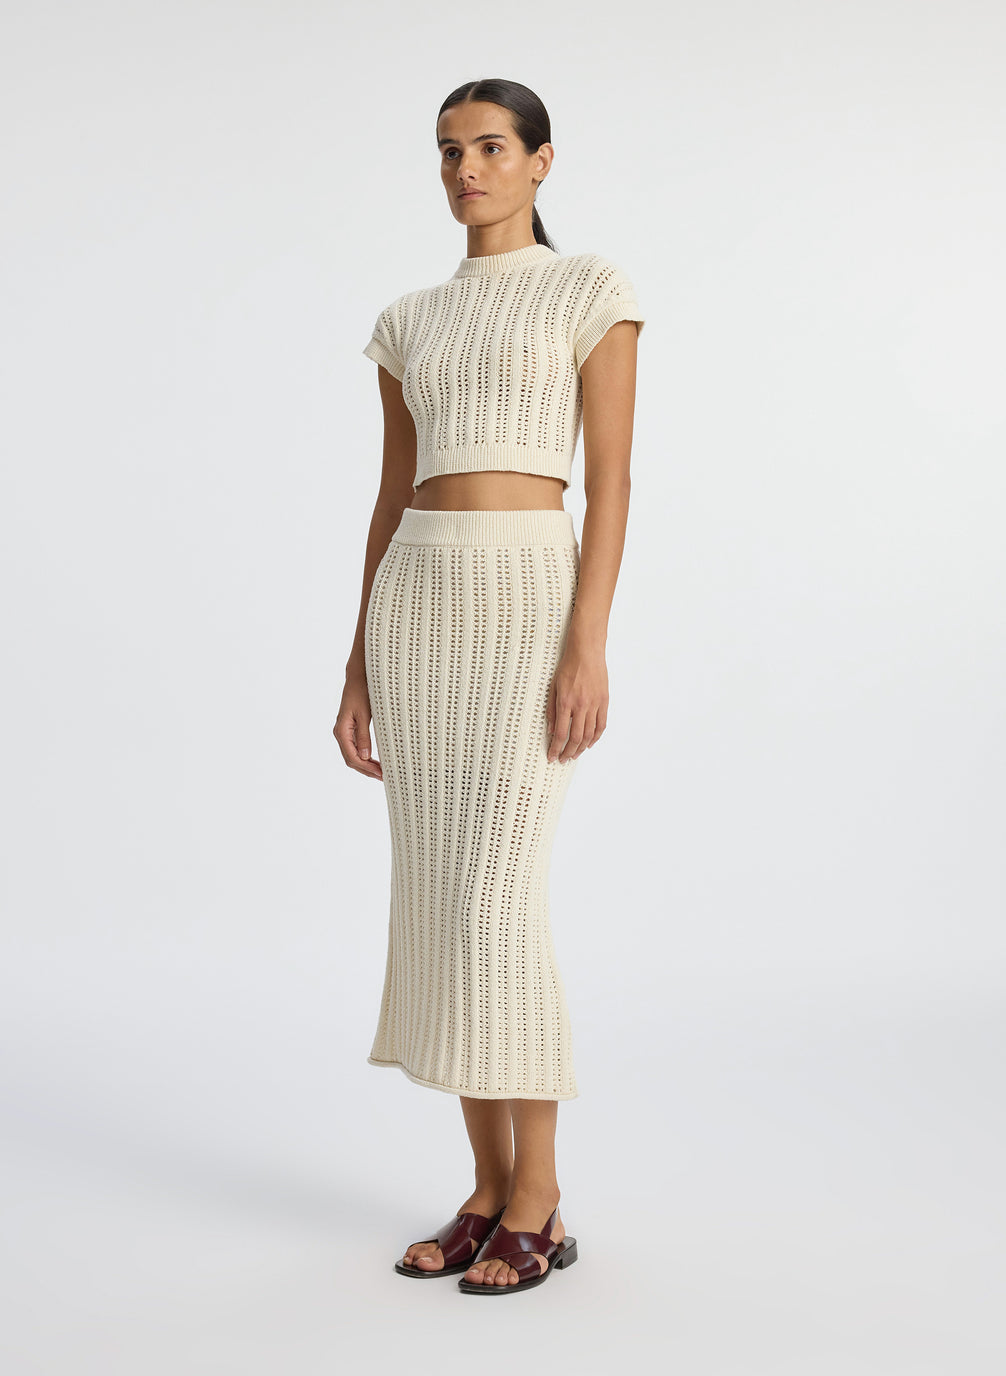 side view of woman wearing cream open weave cropped top and and matching midi skirt